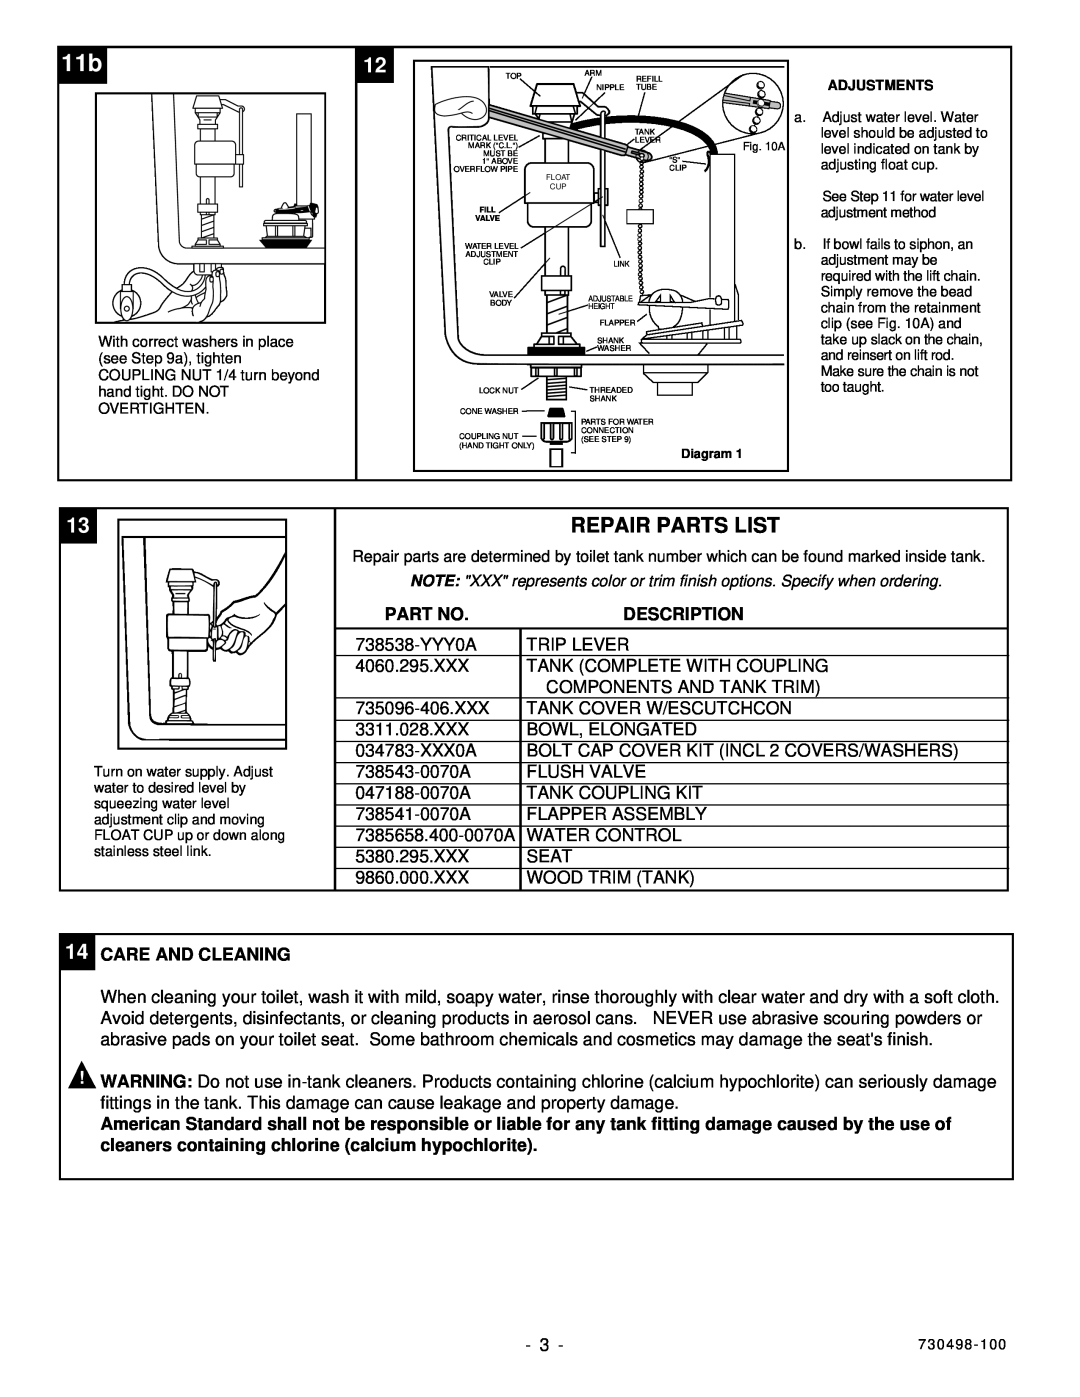 American Standard 2860.330, 2860.334 installation instructions Repair Parts List, Description, 14CARE AND CLEANING 